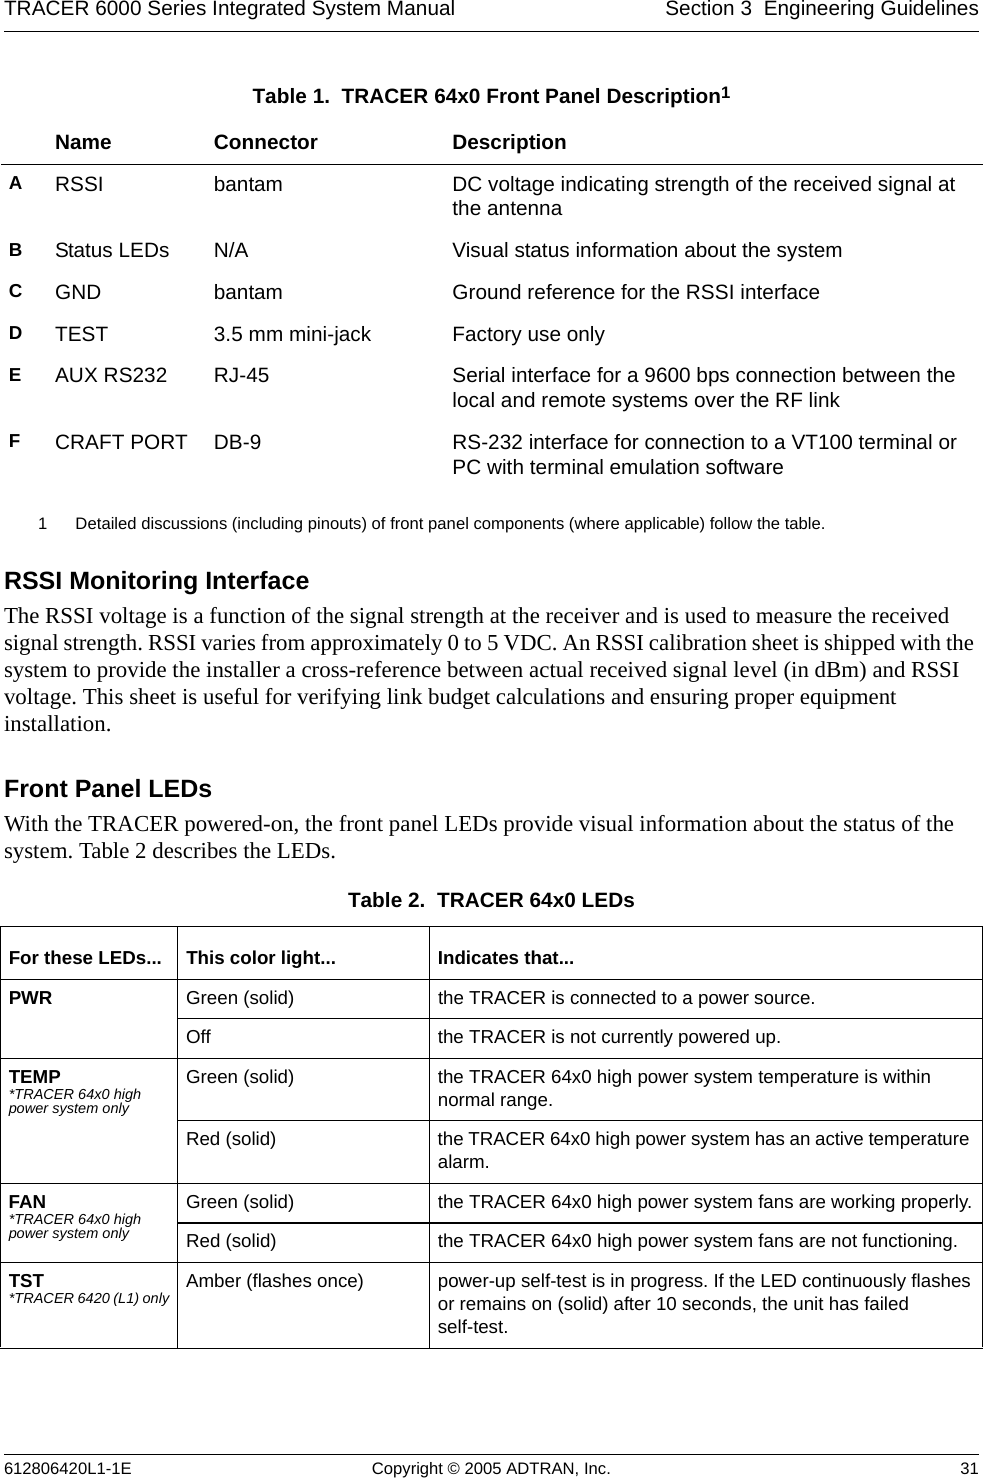 TRACER 6000 Series Integrated System Manual Section 3  Engineering Guidelines612806420L1-1E Copyright © 2005 ADTRAN, Inc. 31RSSI Monitoring InterfaceThe RSSI voltage is a function of the signal strength at the receiver and is used to measure the received signal strength. RSSI varies from approximately 0 to 5 VDC. An RSSI calibration sheet is shipped with the system to provide the installer a cross-reference between actual received signal level (in dBm) and RSSI voltage. This sheet is useful for verifying link budget calculations and ensuring proper equipment installation.Front Panel LEDsWith the TRACER powered-on, the front panel LEDs provide visual information about the status of the system. Table 2 describes the LEDs.Table 1.  TRACER 64x0 Front Panel Description1 1 Detailed discussions (including pinouts) of front panel components (where applicable) follow the table.Name Connector DescriptionARSSI bantam DC voltage indicating strength of the received signal at the antennaBStatus LEDs N/A Visual status information about the systemCGND bantam Ground reference for the RSSI interfaceDTEST 3.5 mm mini-jack Factory use onlyEAUX RS232 RJ-45 Serial interface for a 9600 bps connection between the local and remote systems over the RF linkFCRAFT PORT DB-9 RS-232 interface for connection to a VT100 terminal or PC with terminal emulation softwareTable 2.  TRACER 64x0 LEDs For these LEDs... This color light... Indicates that...PWR Green (solid) the TRACER is connected to a power source.Off the TRACER is not currently powered up.TEMP *TRACER 64x0 high power system onlyGreen (solid) the TRACER 64x0 high power system temperature is within normal range.Red (solid) the TRACER 64x0 high power system has an active temperature alarm.FAN *TRACER 64x0 high power system onlyGreen (solid) the TRACER 64x0 high power system fans are working properly.Red (solid) the TRACER 64x0 high power system fans are not functioning.TST *TRACER 6420 (L1) only Amber (flashes once) power-up self-test is in progress. If the LED continuously flashesor remains on (solid) after 10 seconds, the unit has failedself-test.